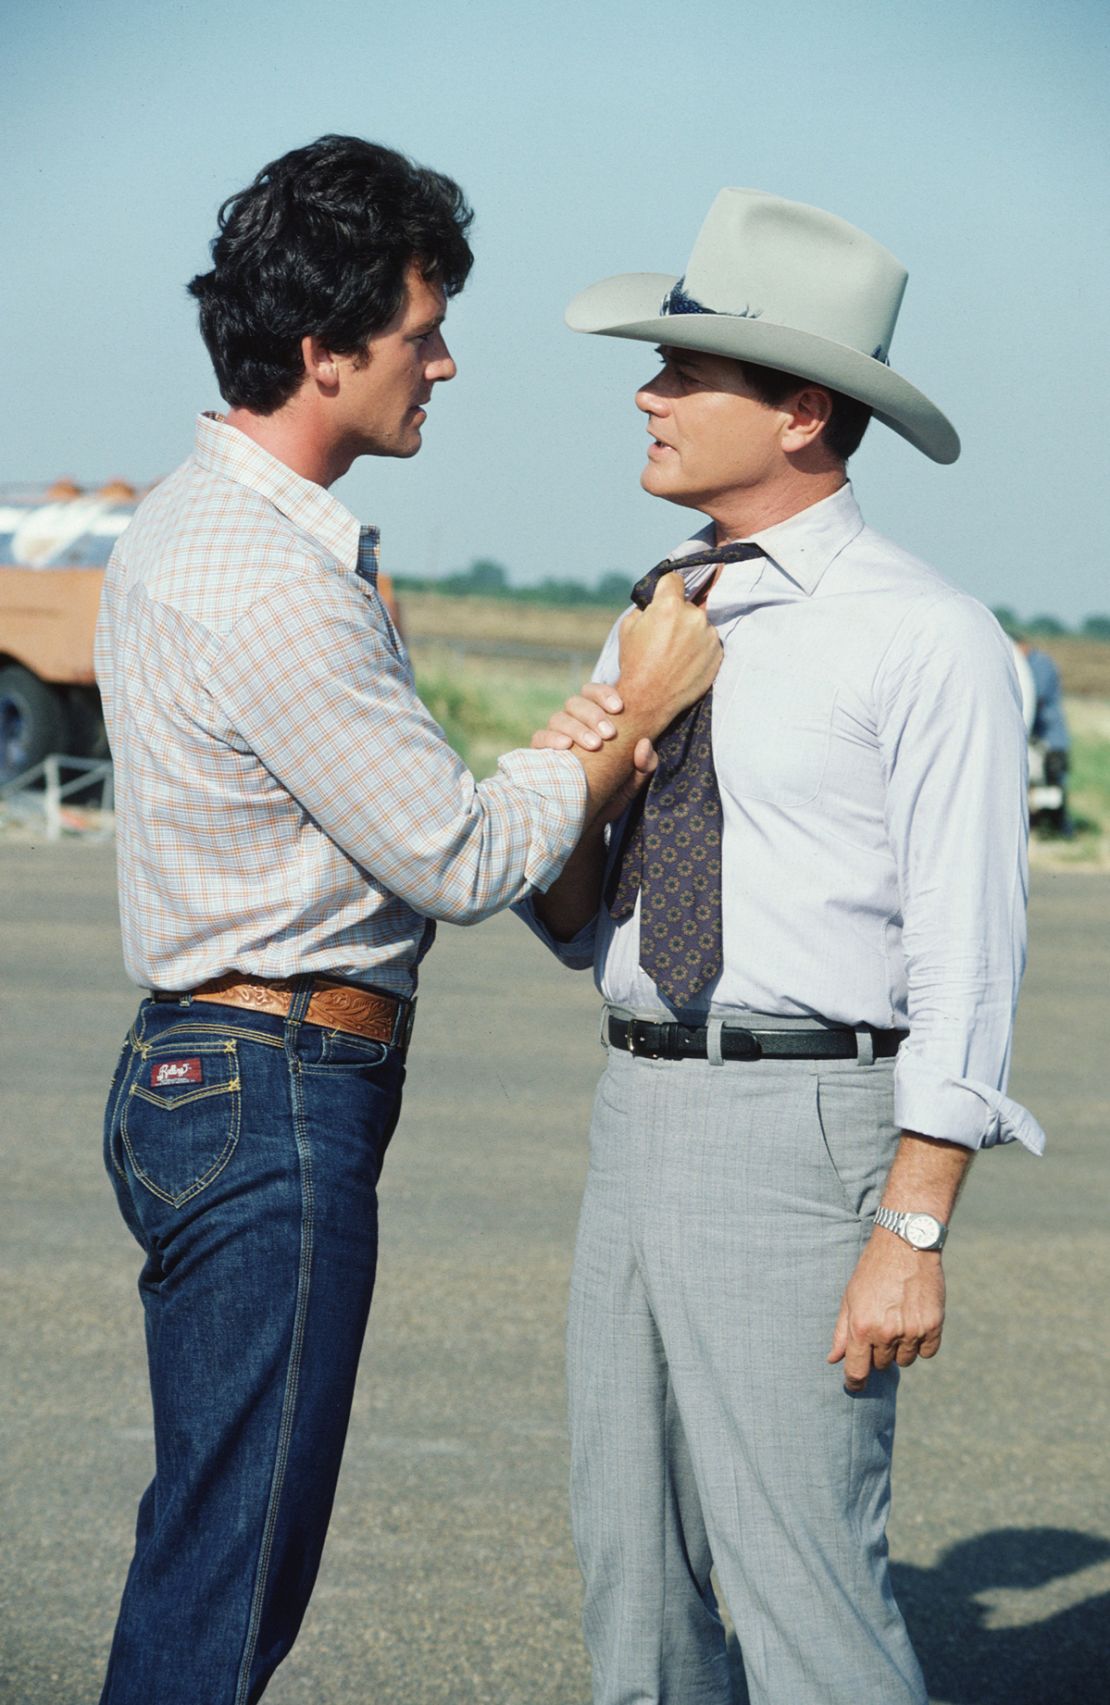 Probably the biggest brother vs. brother rivalry took place on the popular 1980s TV show, "Dallas."
